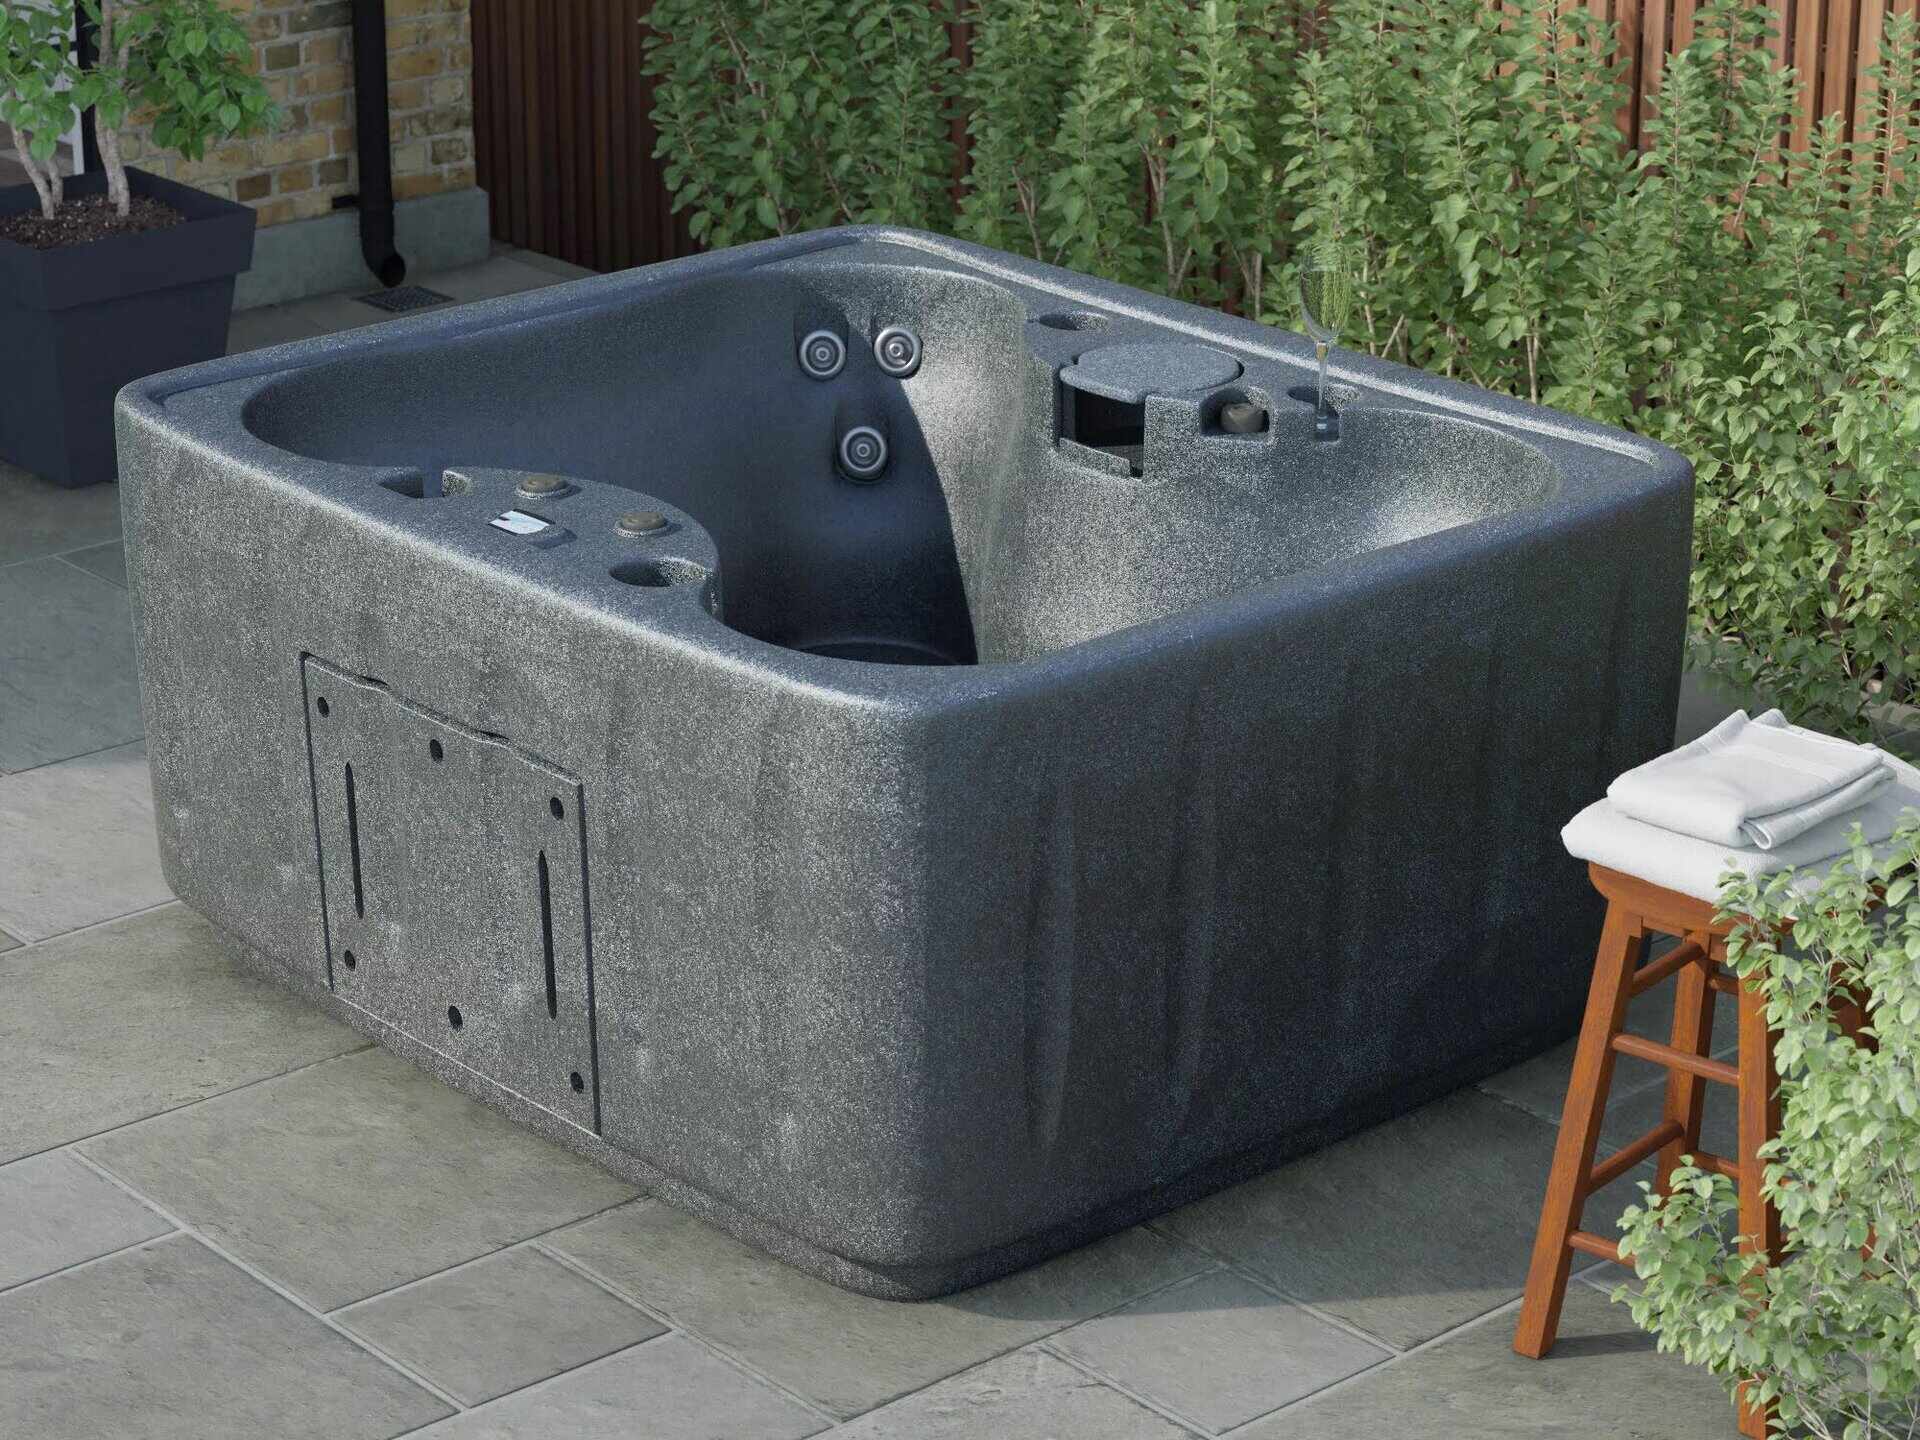 What Is A Plug And Play Hot Tub